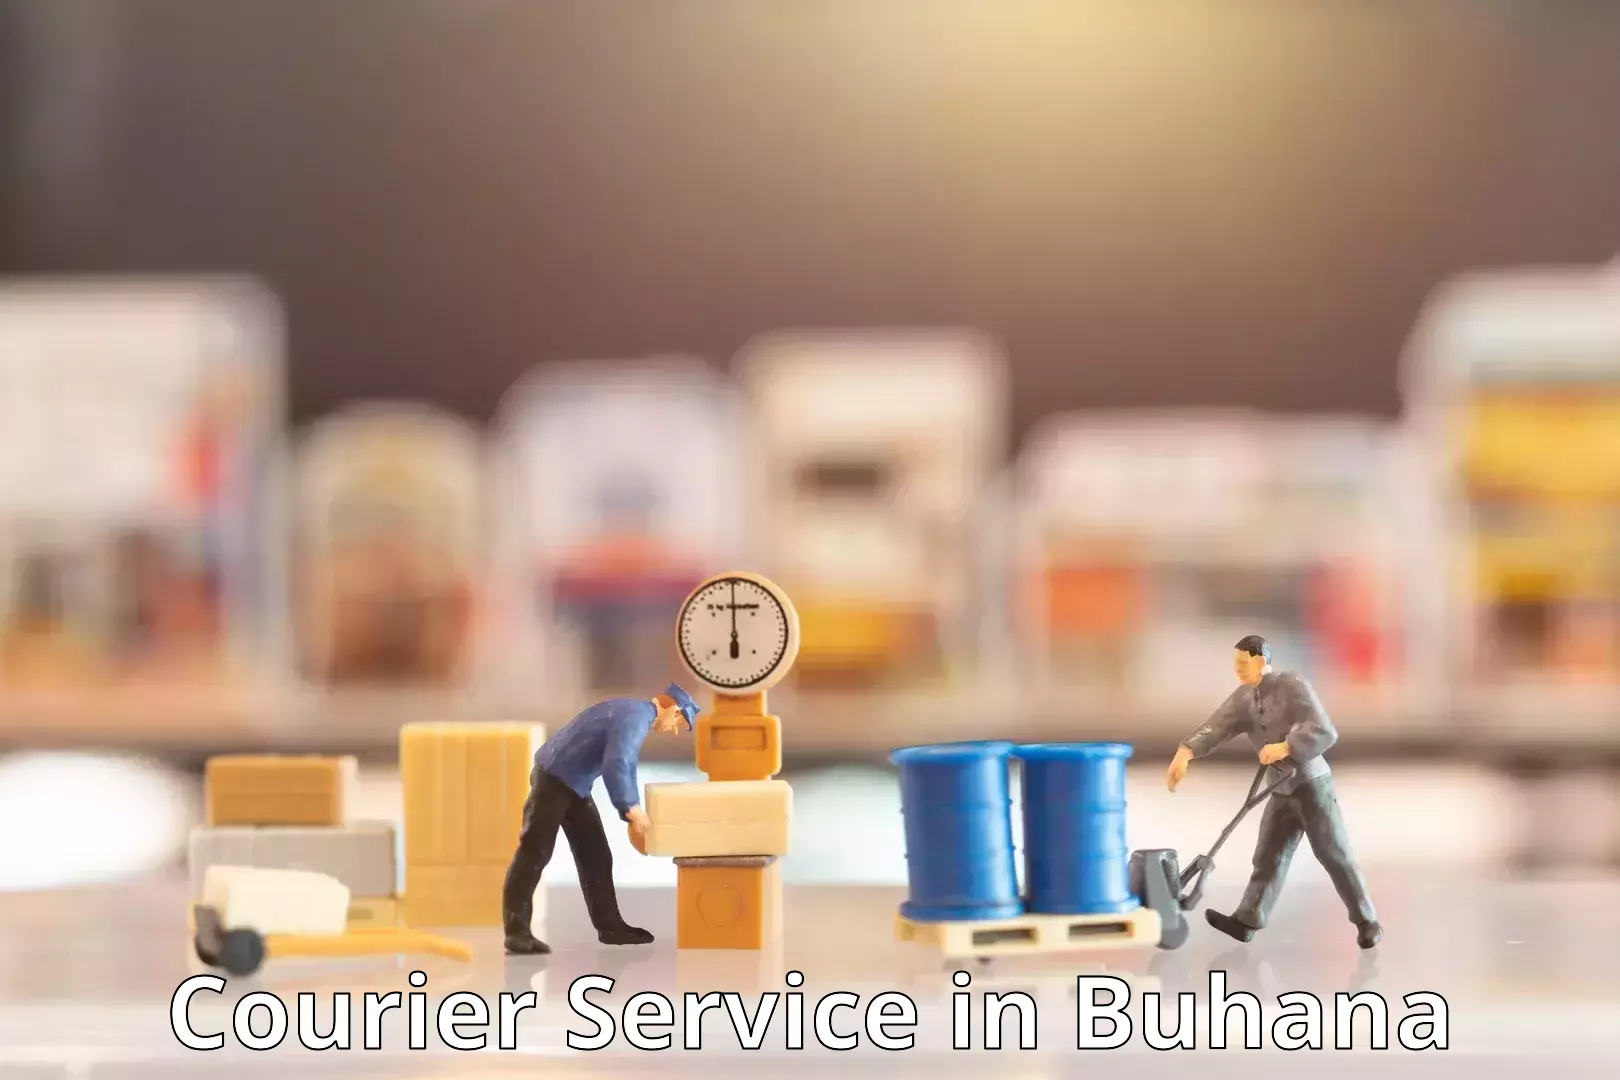 Fast shipping solutions in Buhana